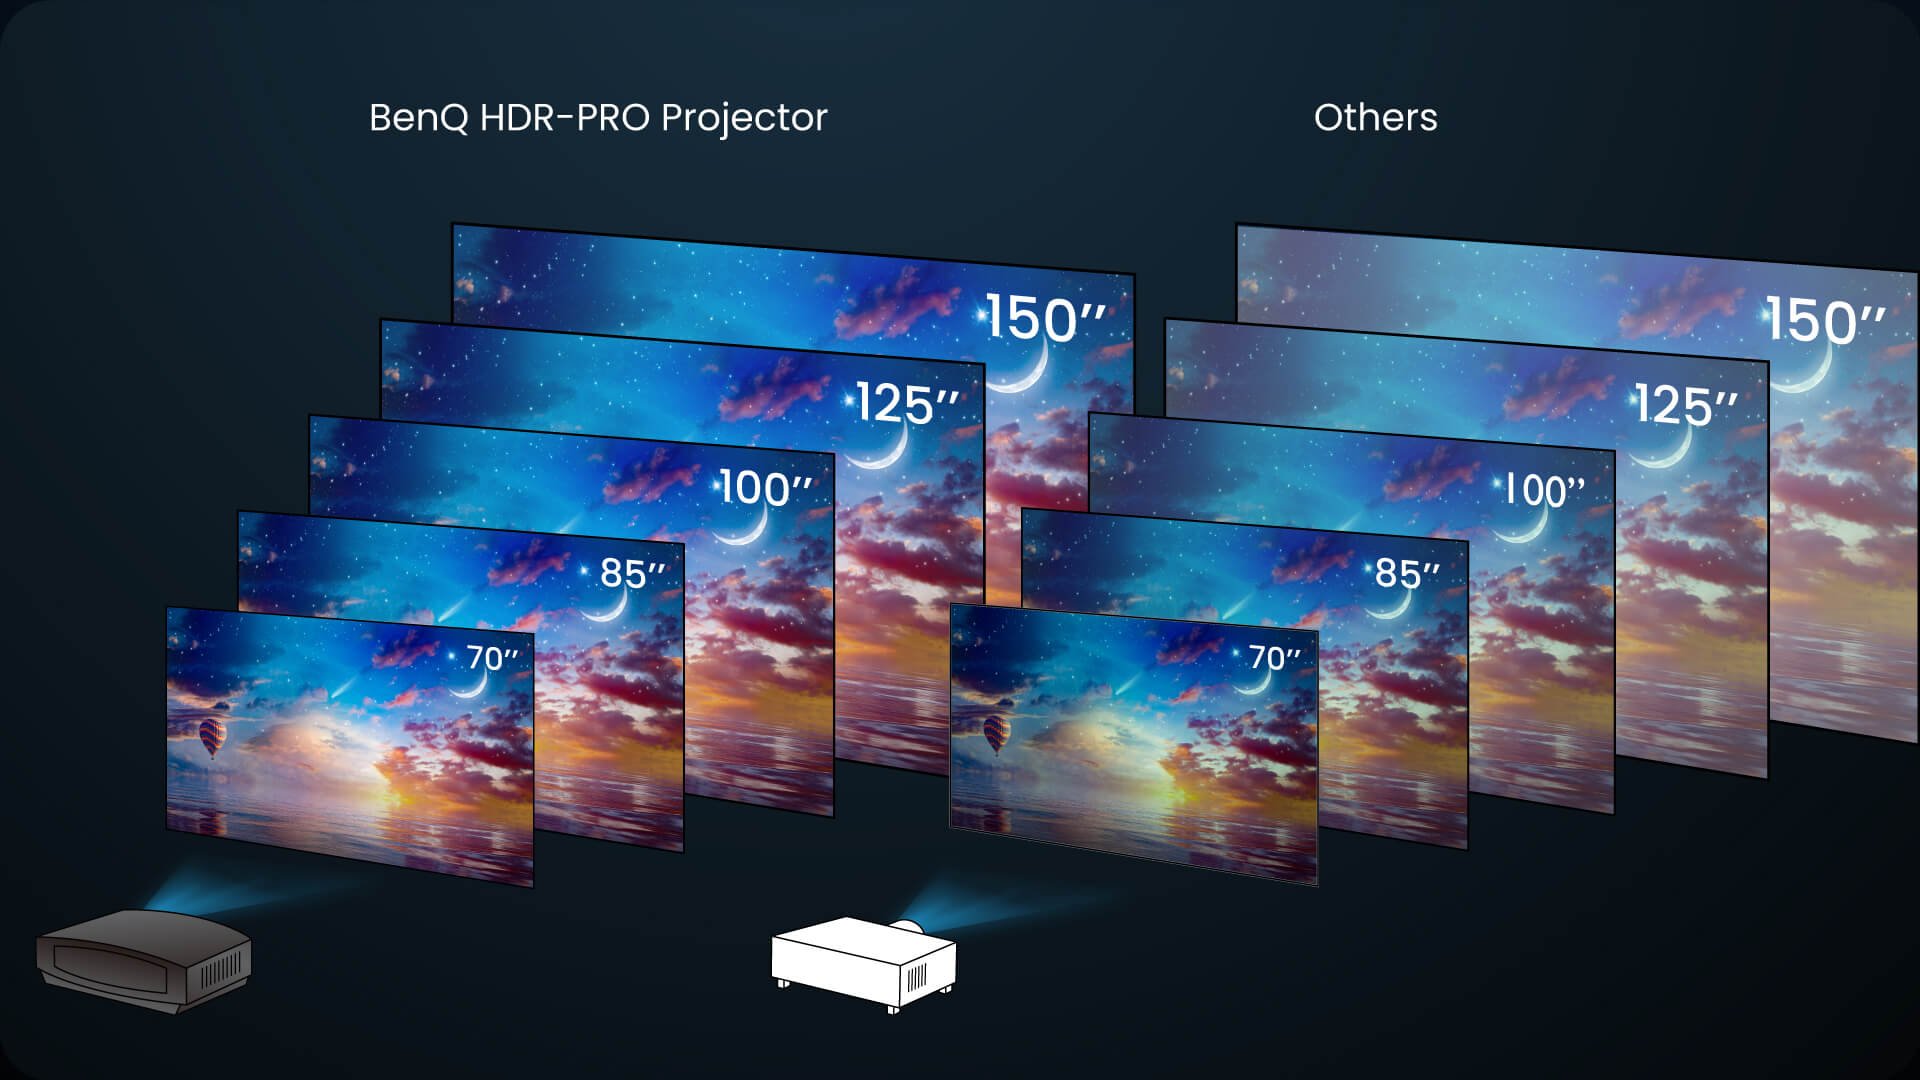 Home Theatre Projector BenQ provides optimized movie modes tailored for home cinema